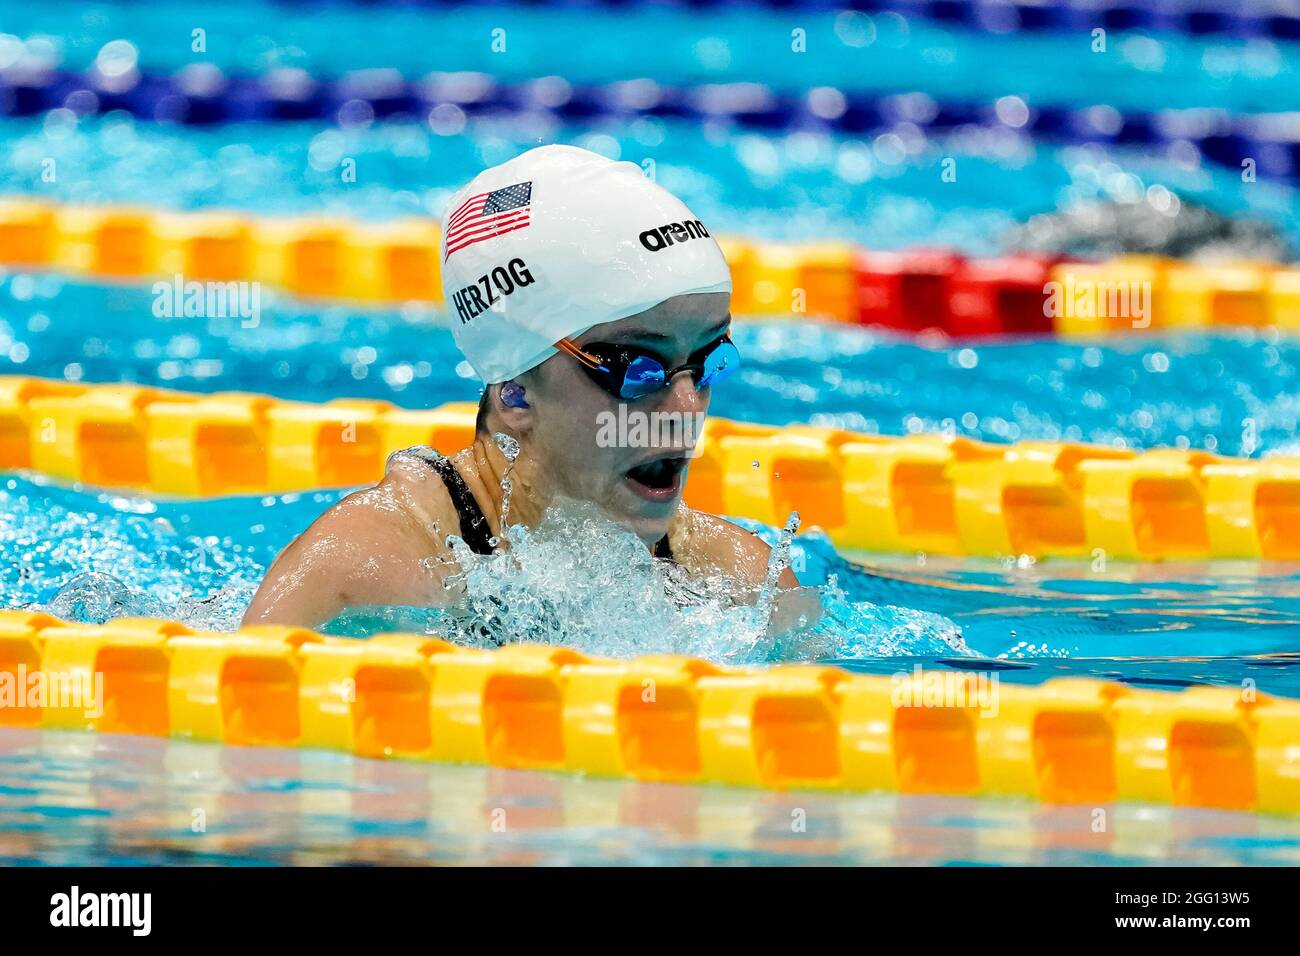 TOKYO, JAPAN - AUGUST 28: Sophia Herzog of the United States competing in the Women's 100m Breaststroke SB6 Heats during the Tokyo 2020 Paralympic Games at Tokyo Aquatics Centre on August 28, 2021 in Tokyo, Japan (Photo by Ilse Schaffers/Orange Pictures) NOCNSF Stock Photo